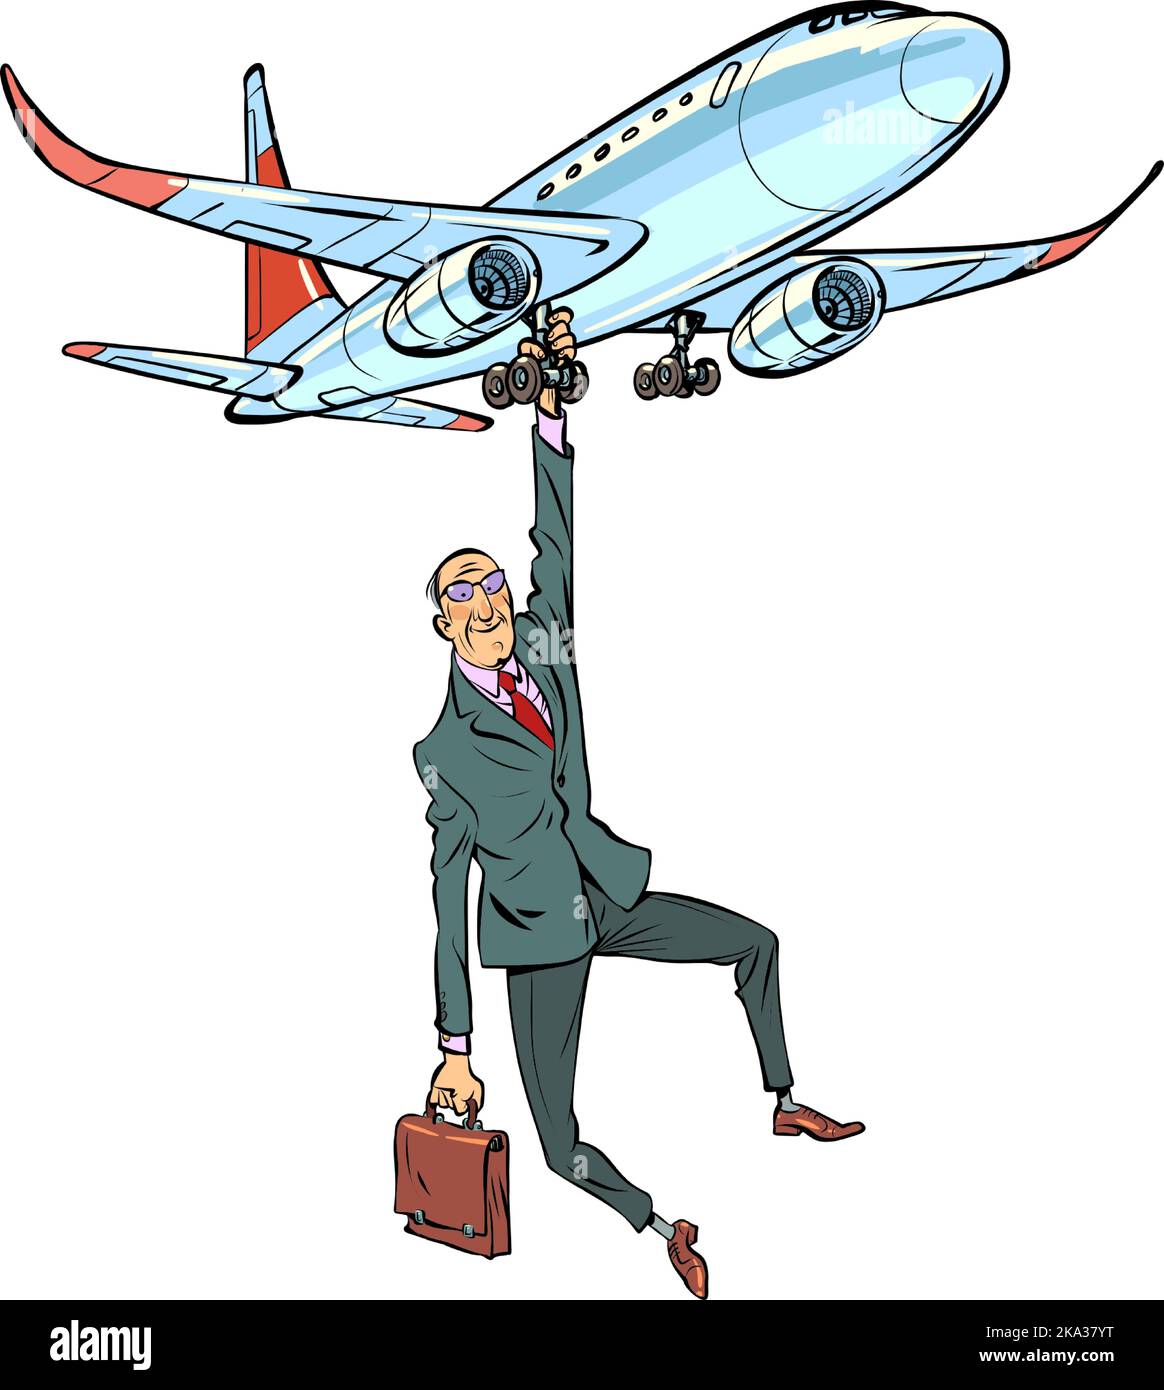 Business relocation. Businessman is flying on an airplane. Economic migration concept Stock Vector